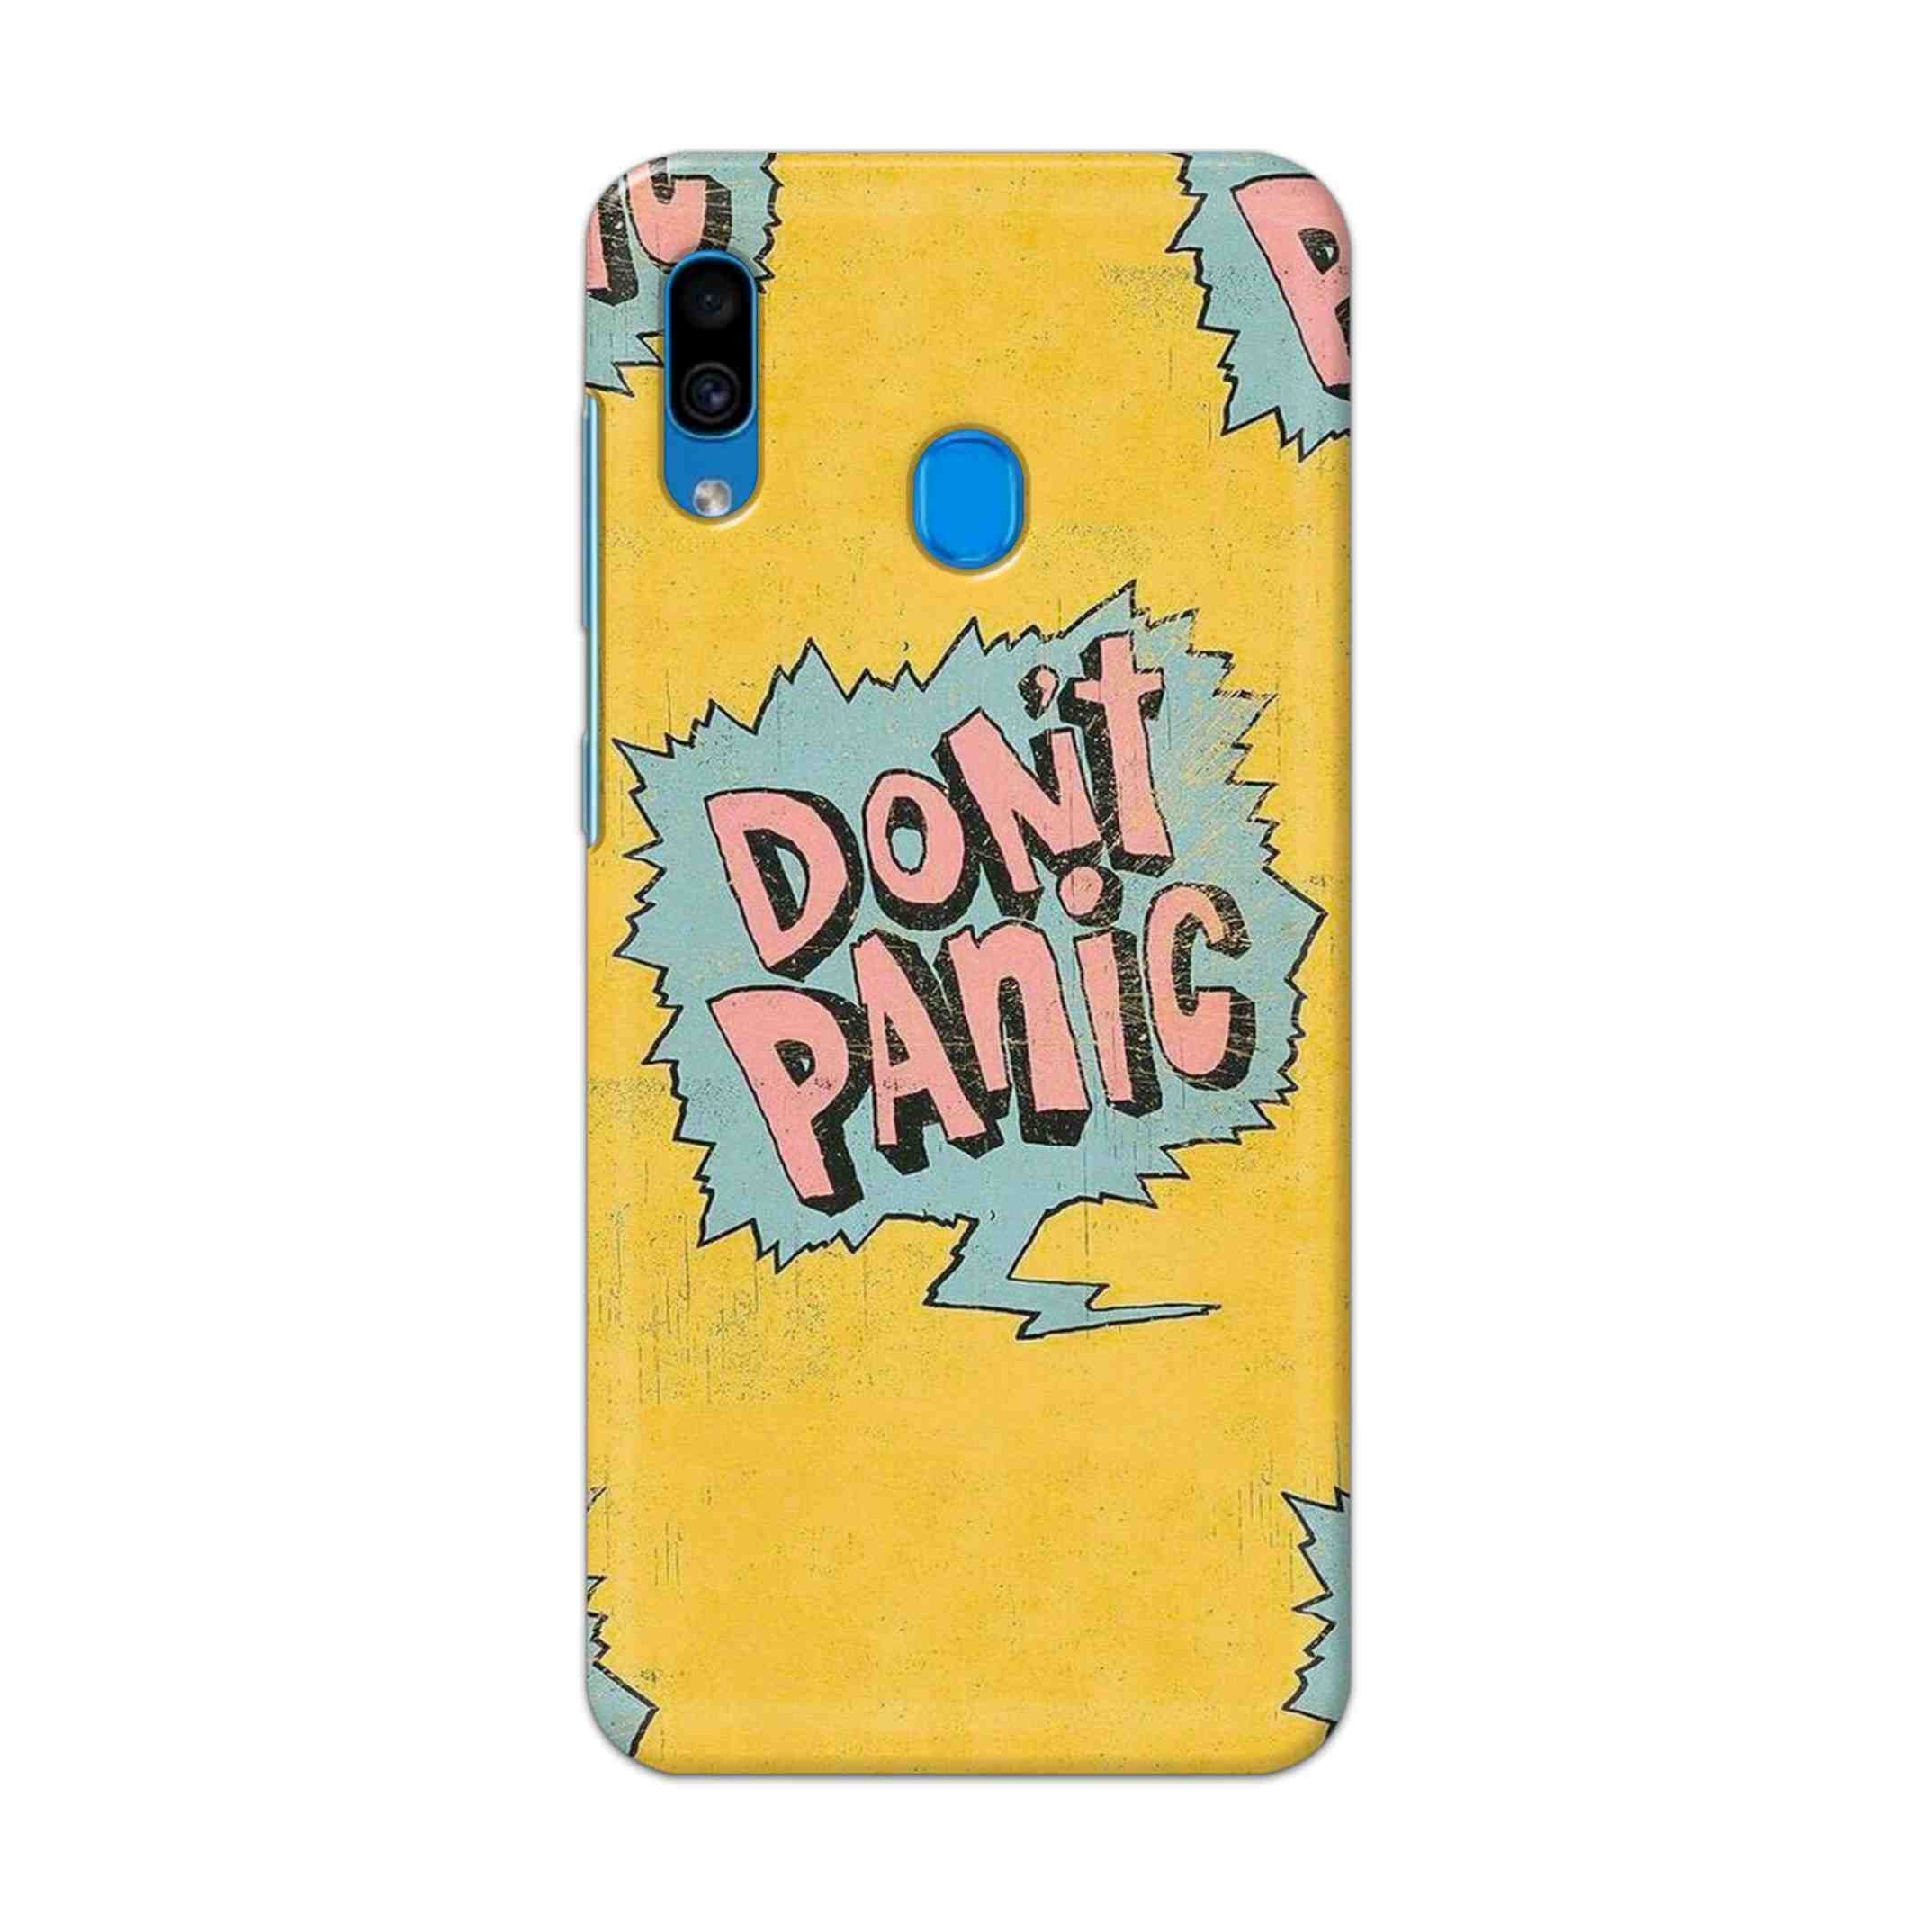 Buy Do Not Panic Hard Back Mobile Phone Case Cover For Samsung Galaxy A30 Online